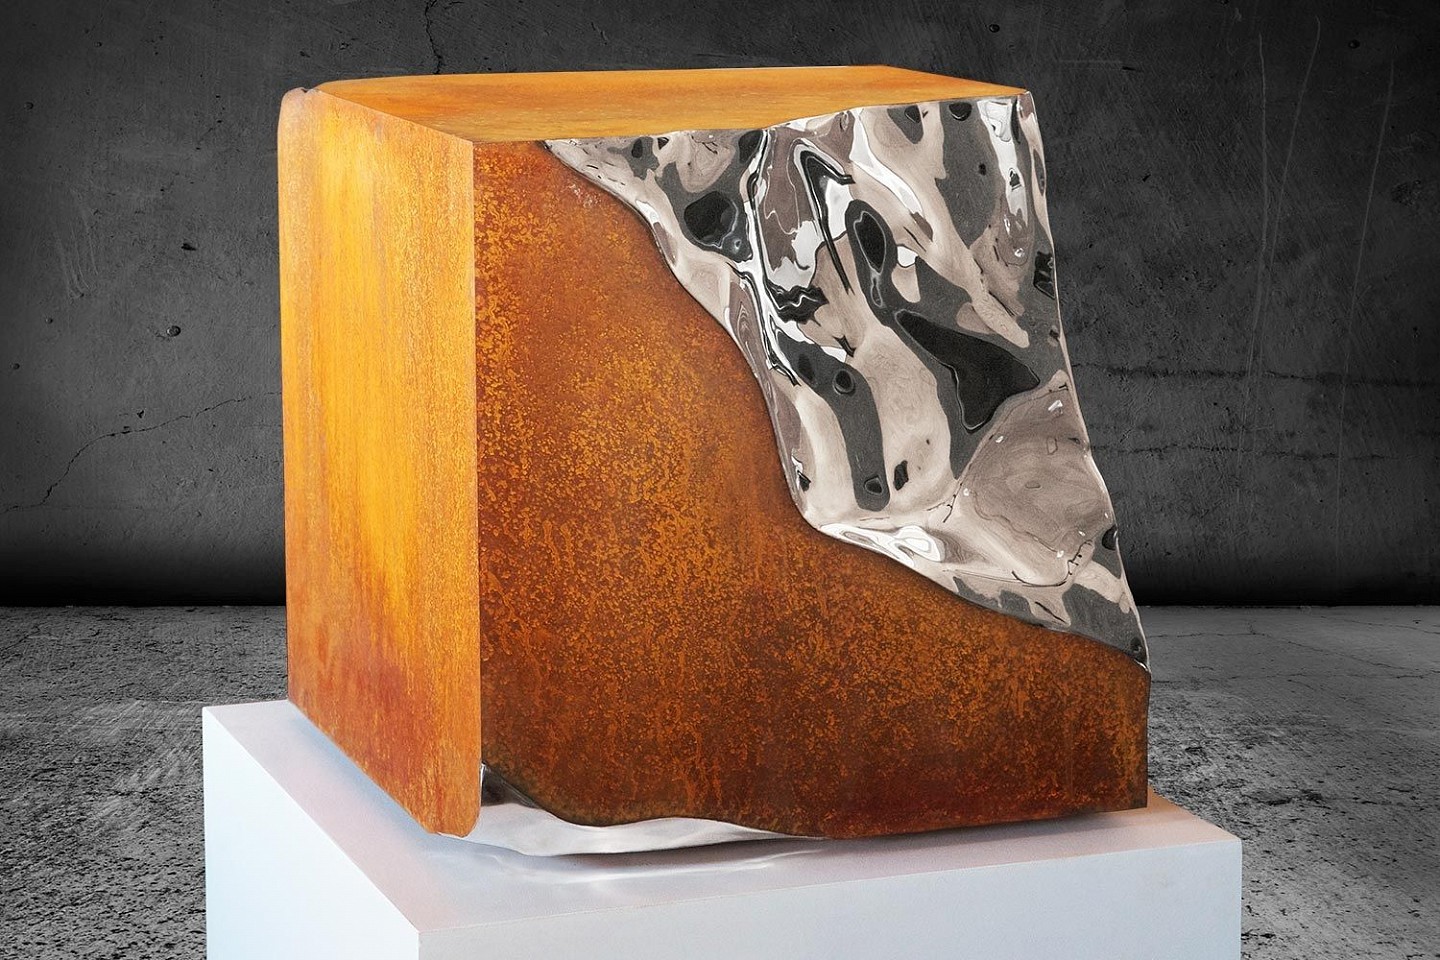 Jonathan Prince, Alembic Cube (study 1), 2016
CorTen and High Chromium Stainless Steel, 16 x 16 x 16 in.
PRIN0017